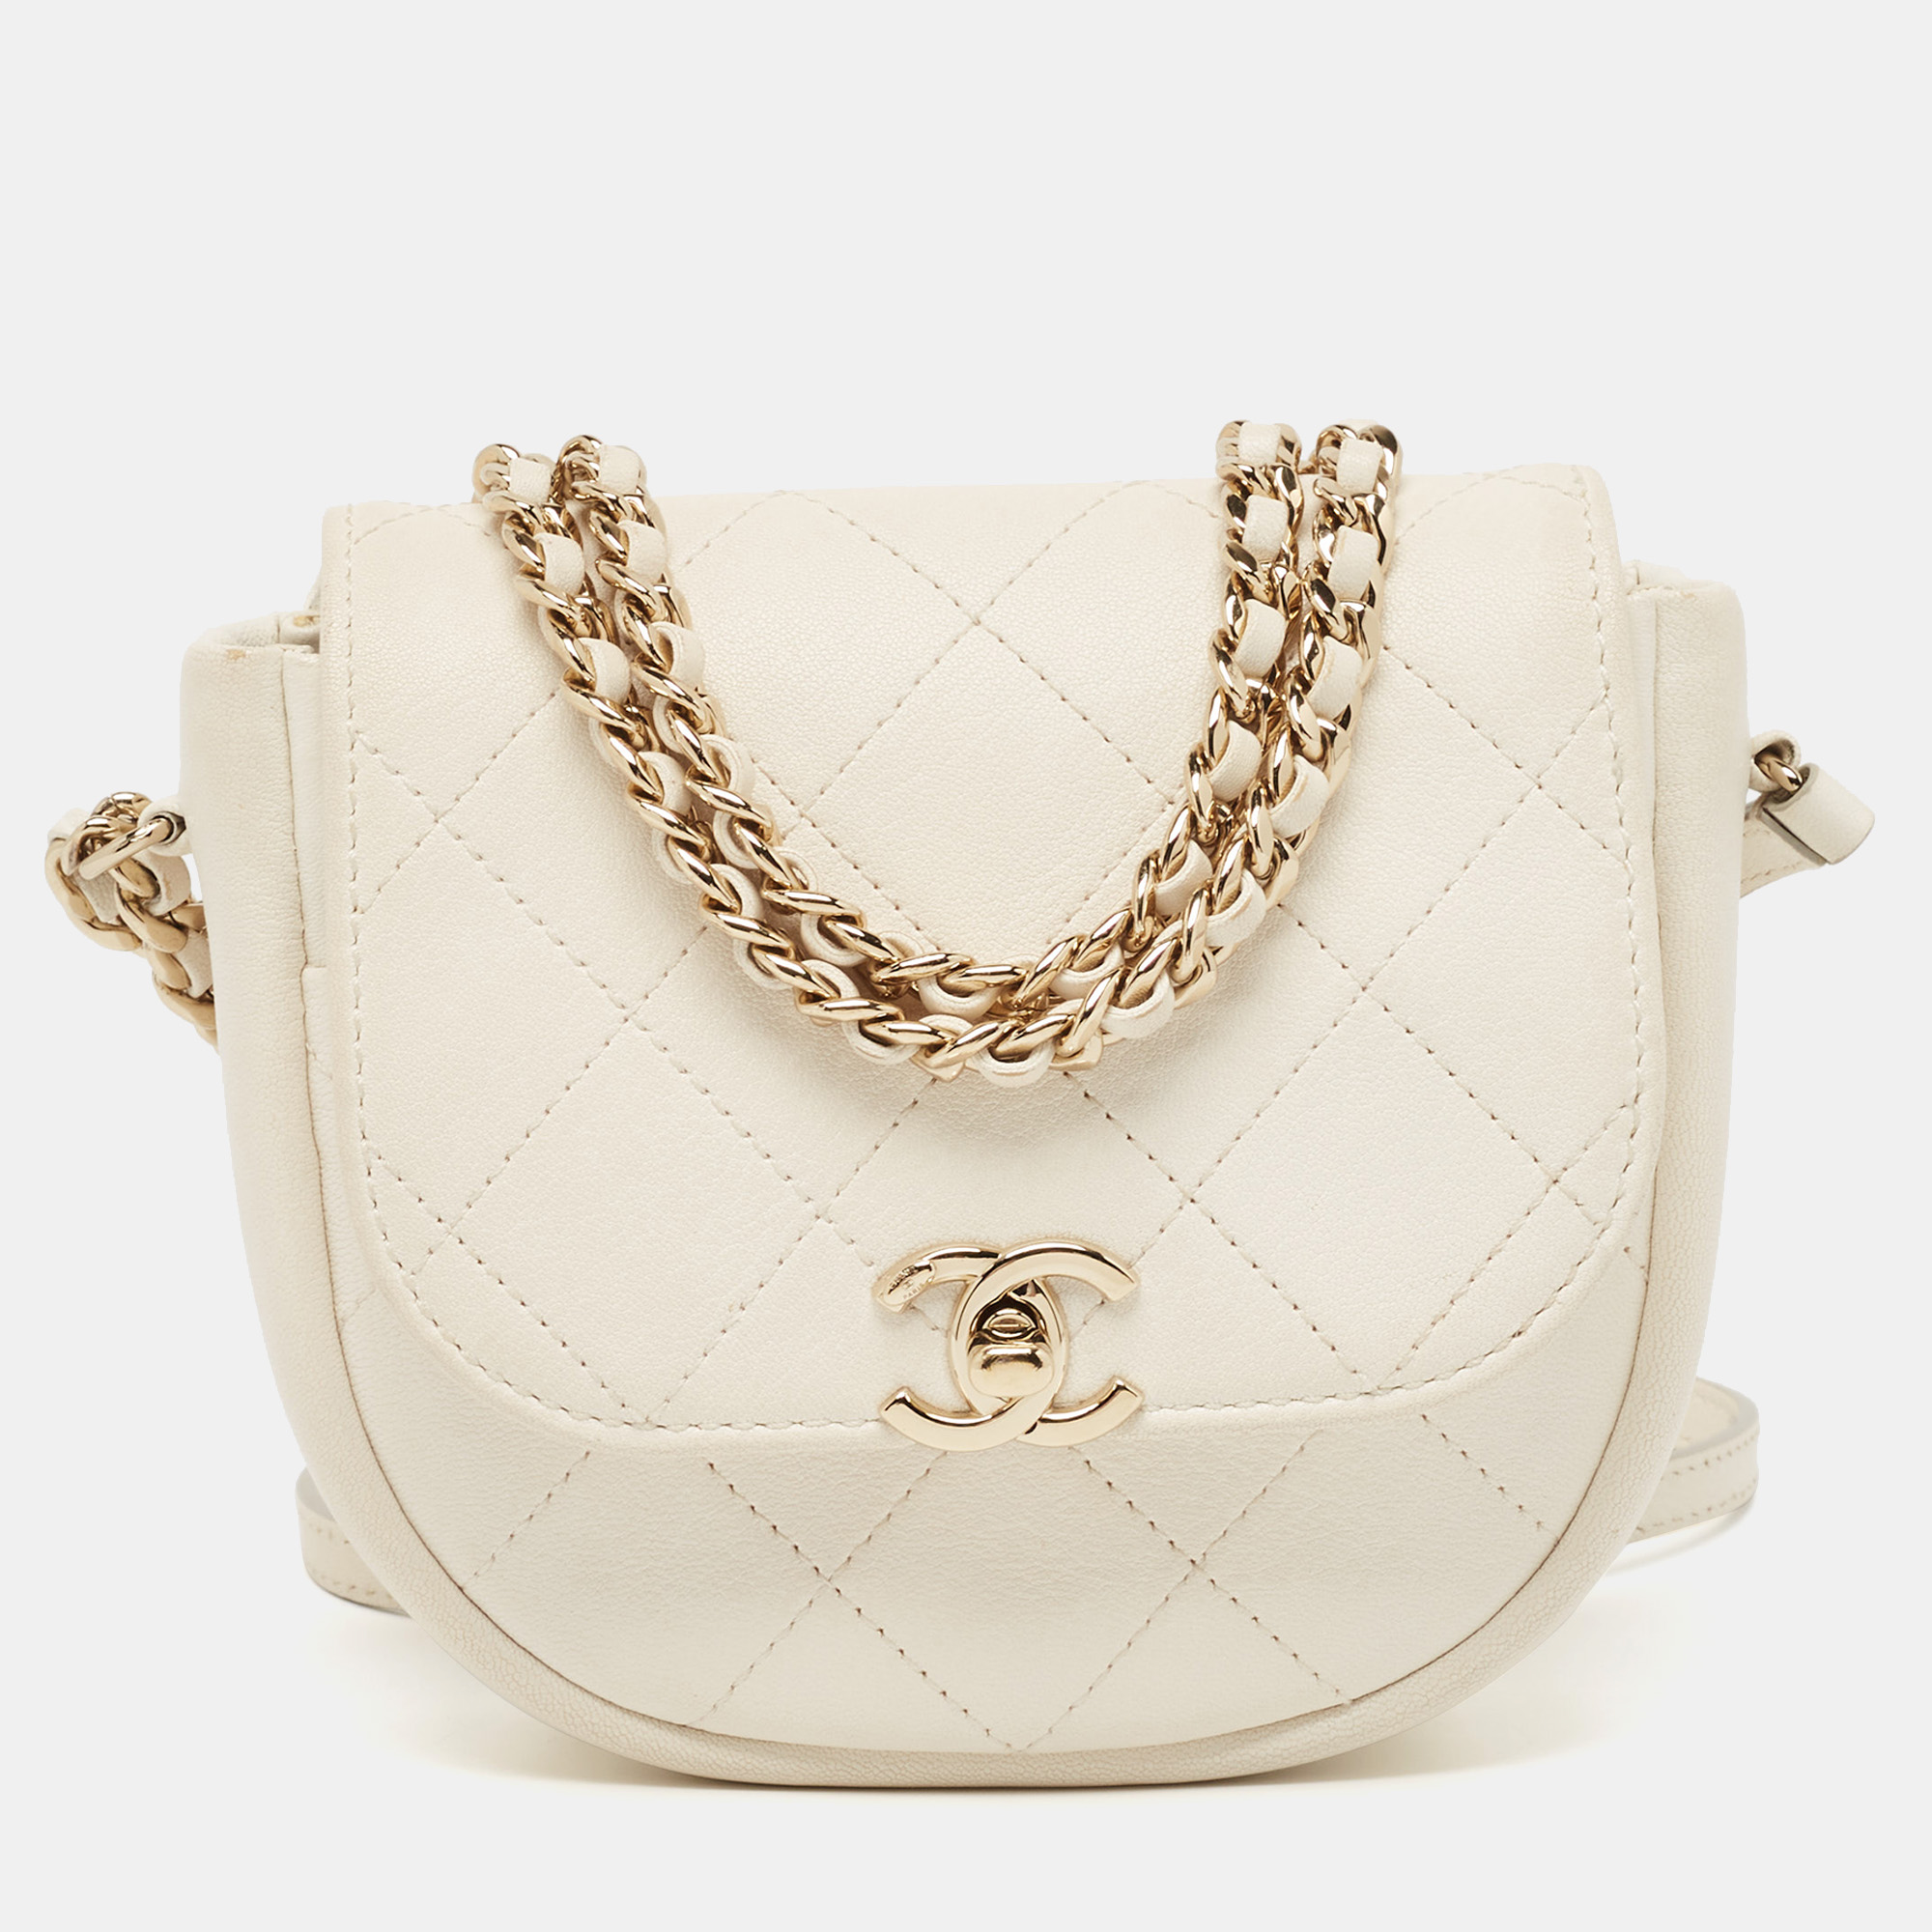 Chanel cream quilted leather casual trip messenger bag